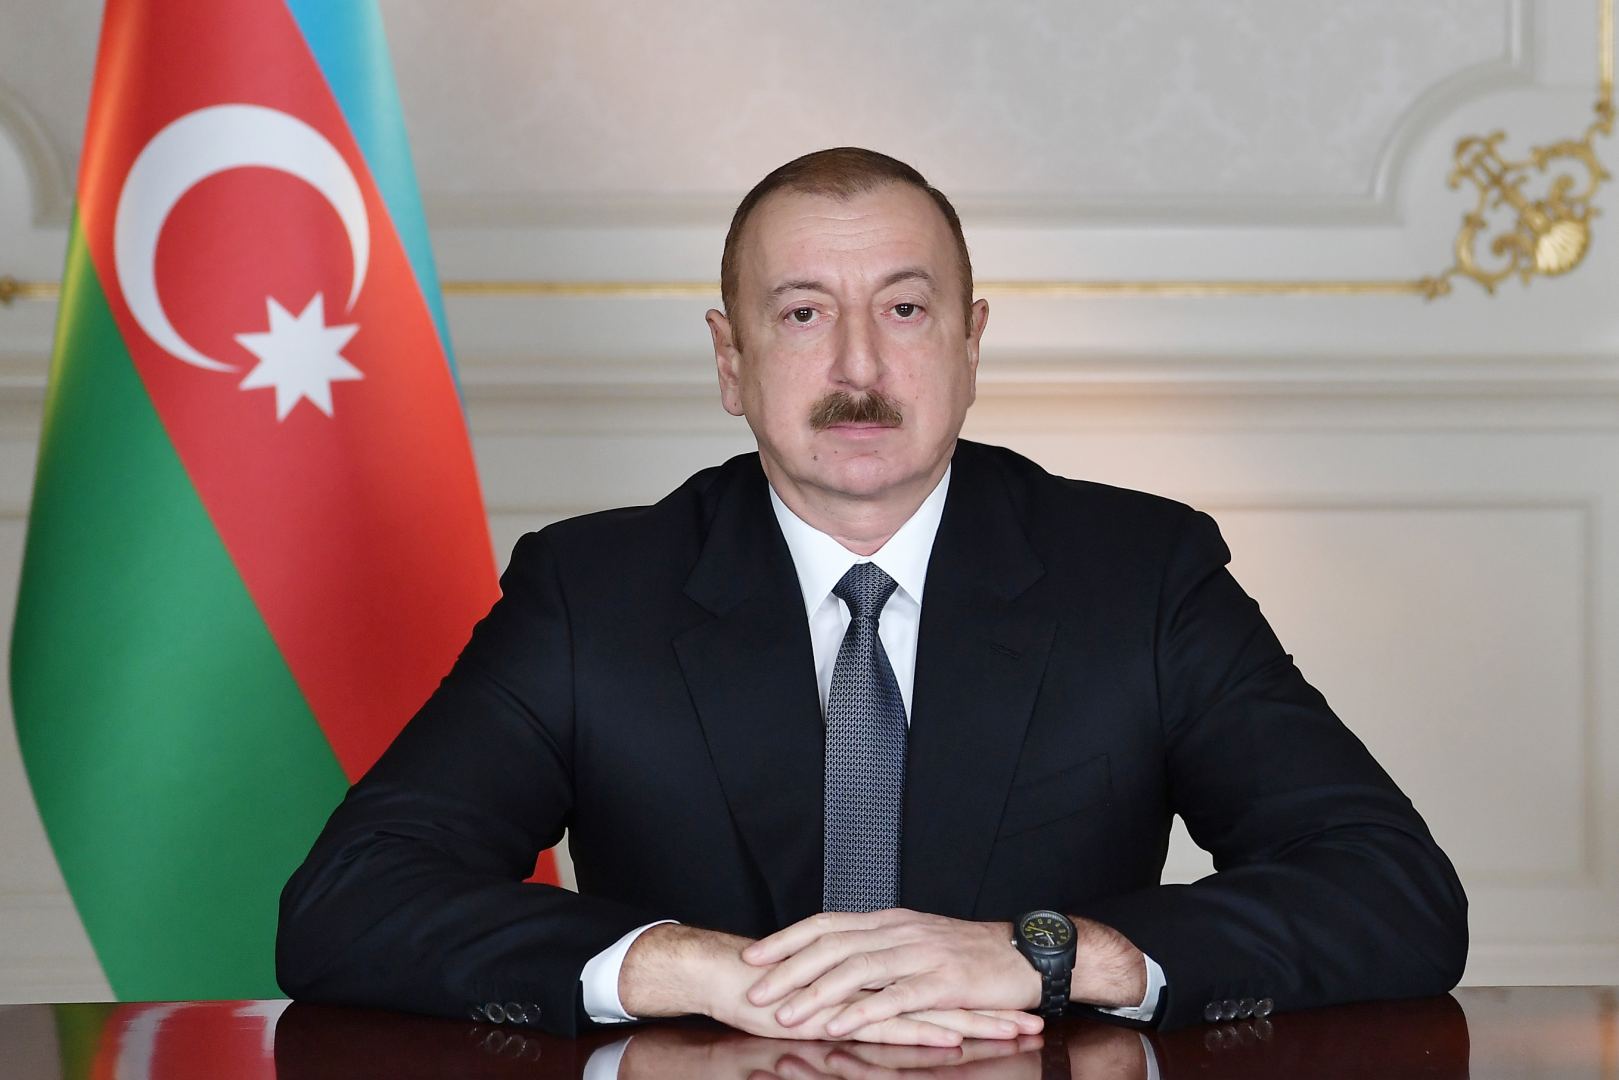 Thirteen more Azerbaijani settlements of Jabrayil district liberated from occupation - President Aliyev